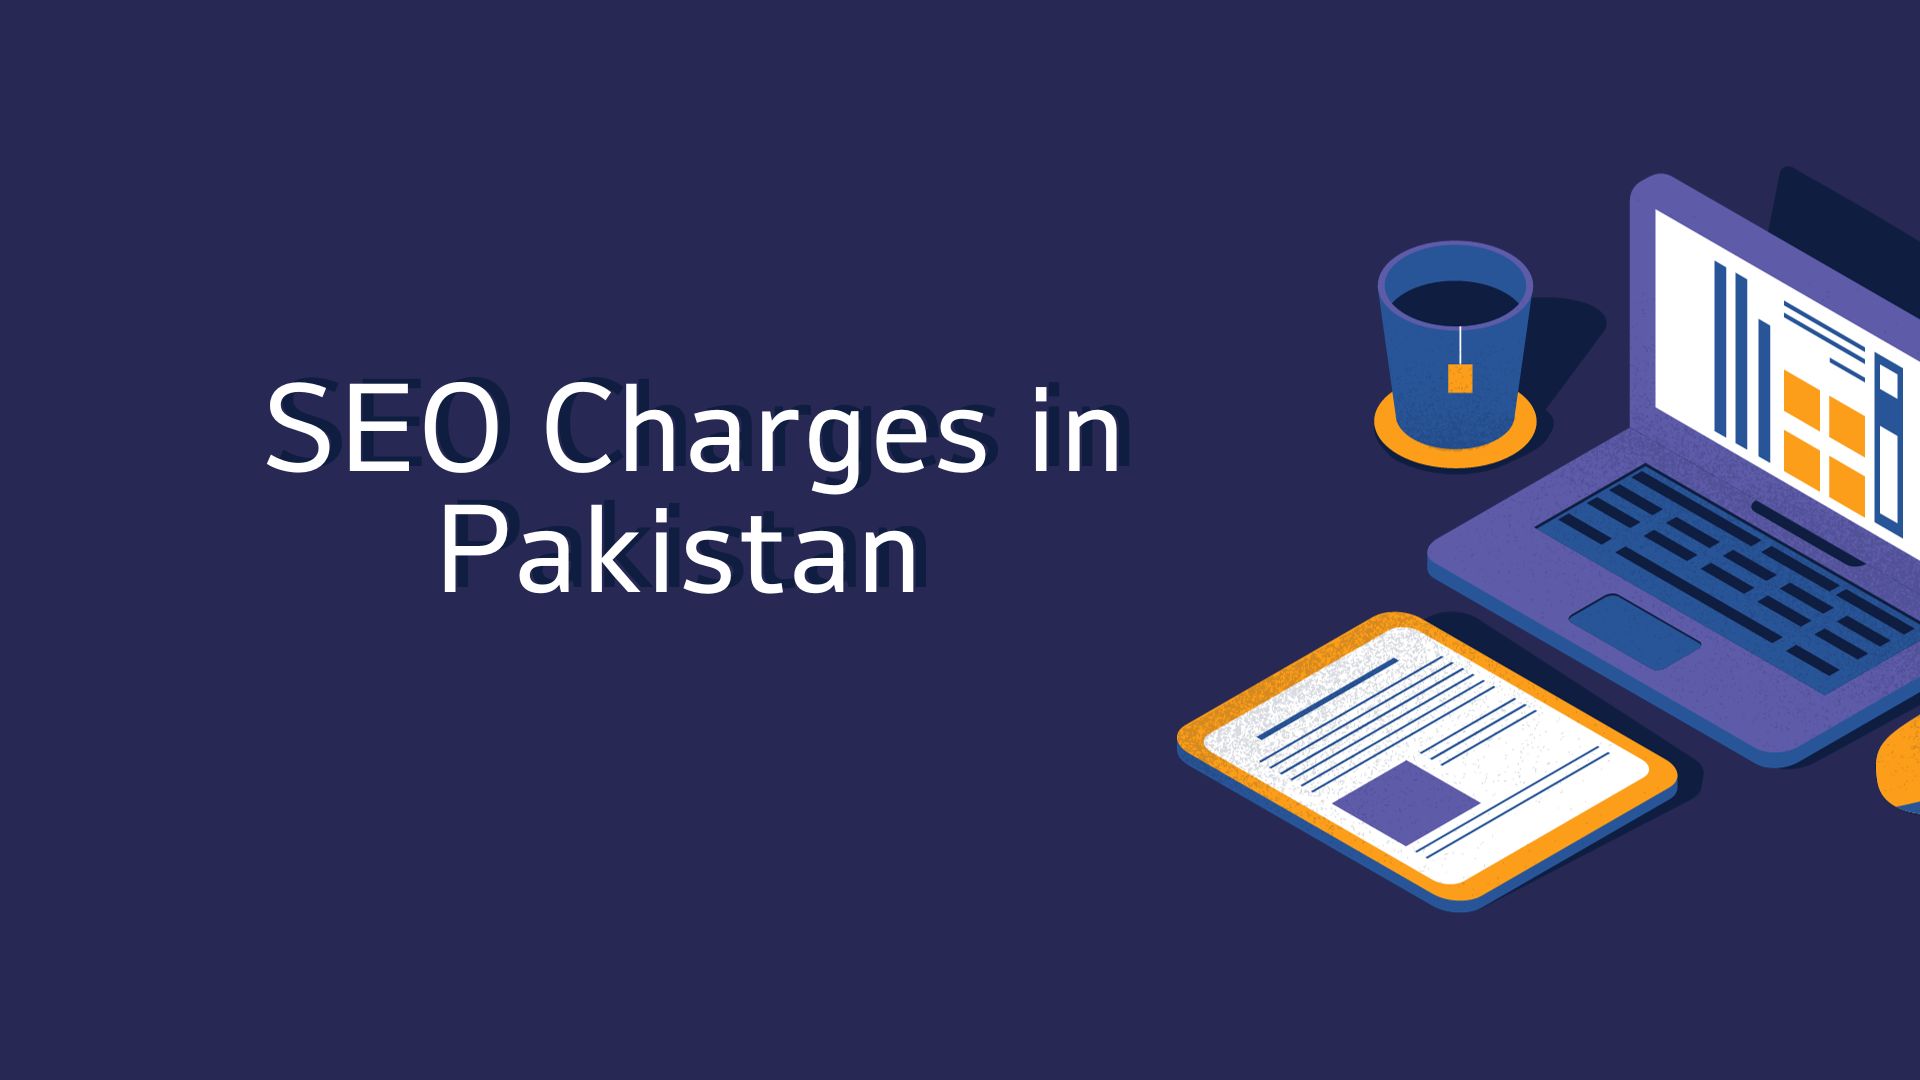 SEO Charges in Pakistan